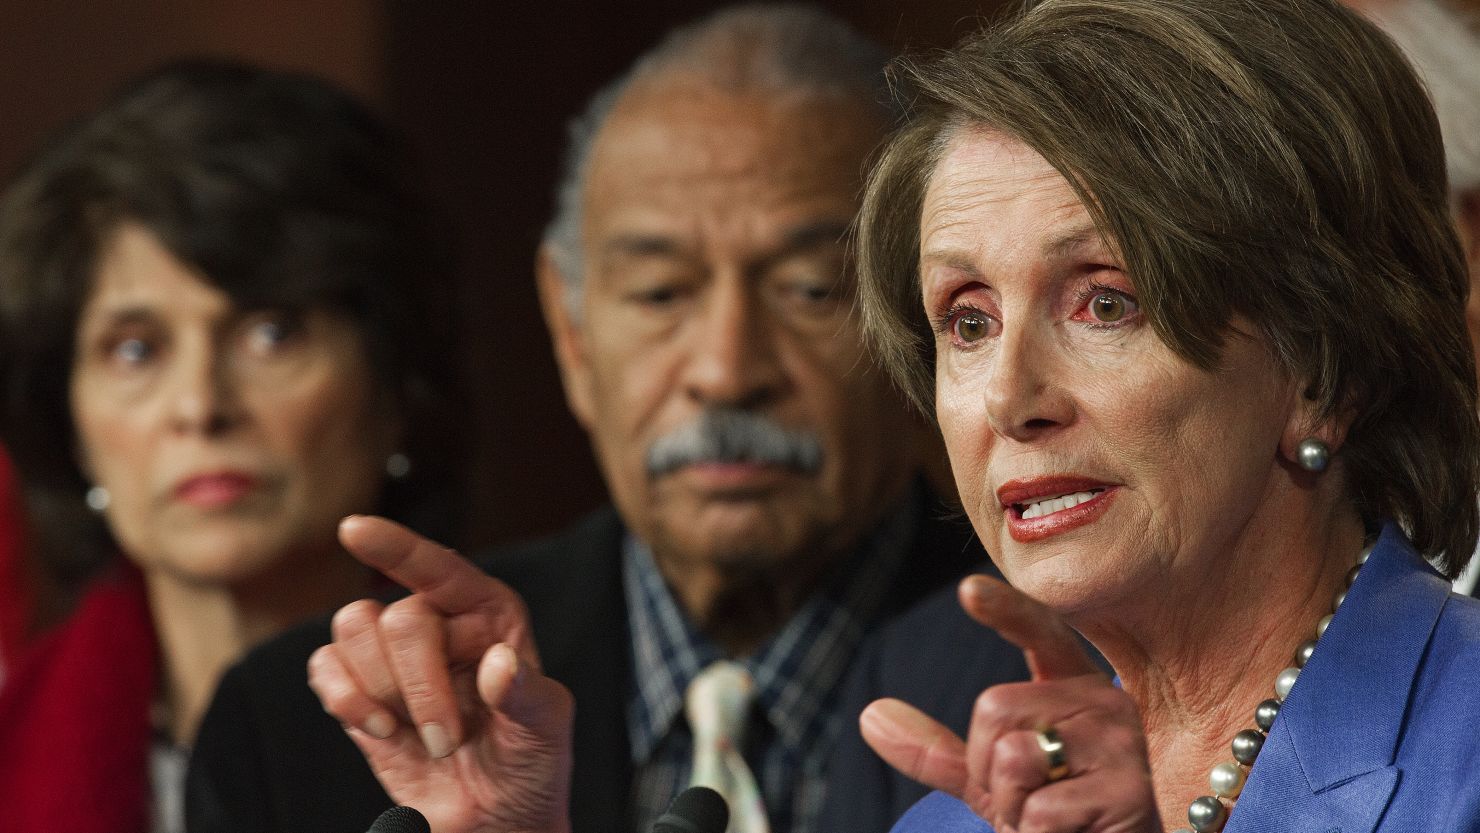 John Conyers (center), D-Michigan, listens as US House Minority Leader Nancy Pelosi (right), D-California, speaks on Capitol Hill on January 5, 2012.